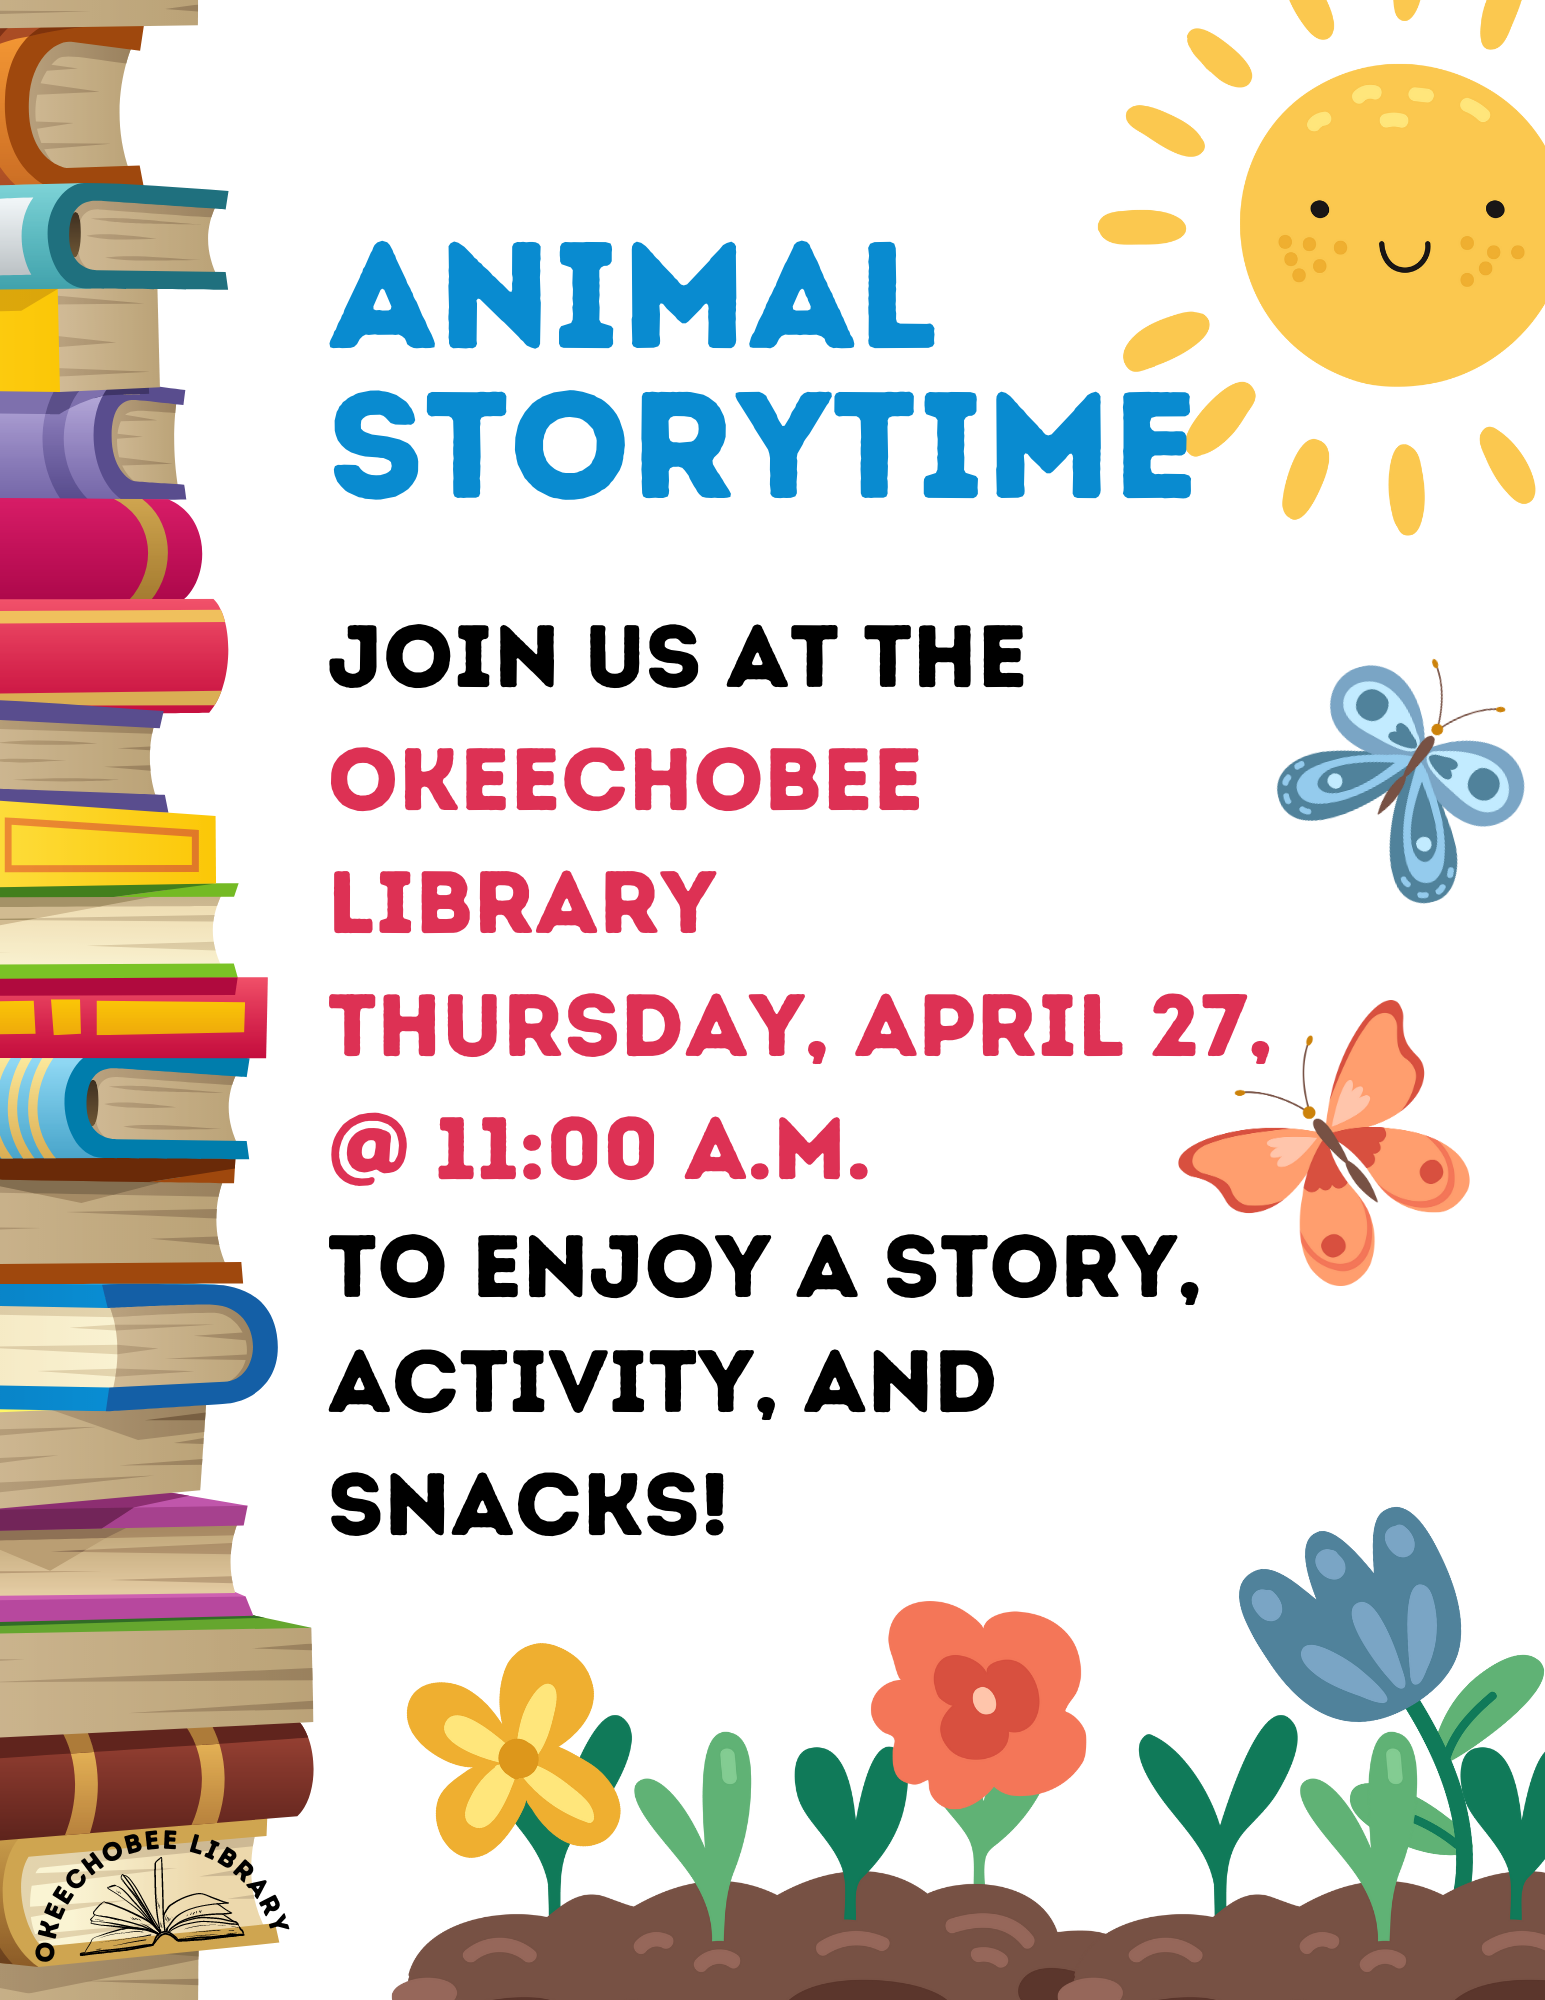 Join us at the Okeechobee Library on April 27th at 11:00 A.M. for our Animal Story Time!